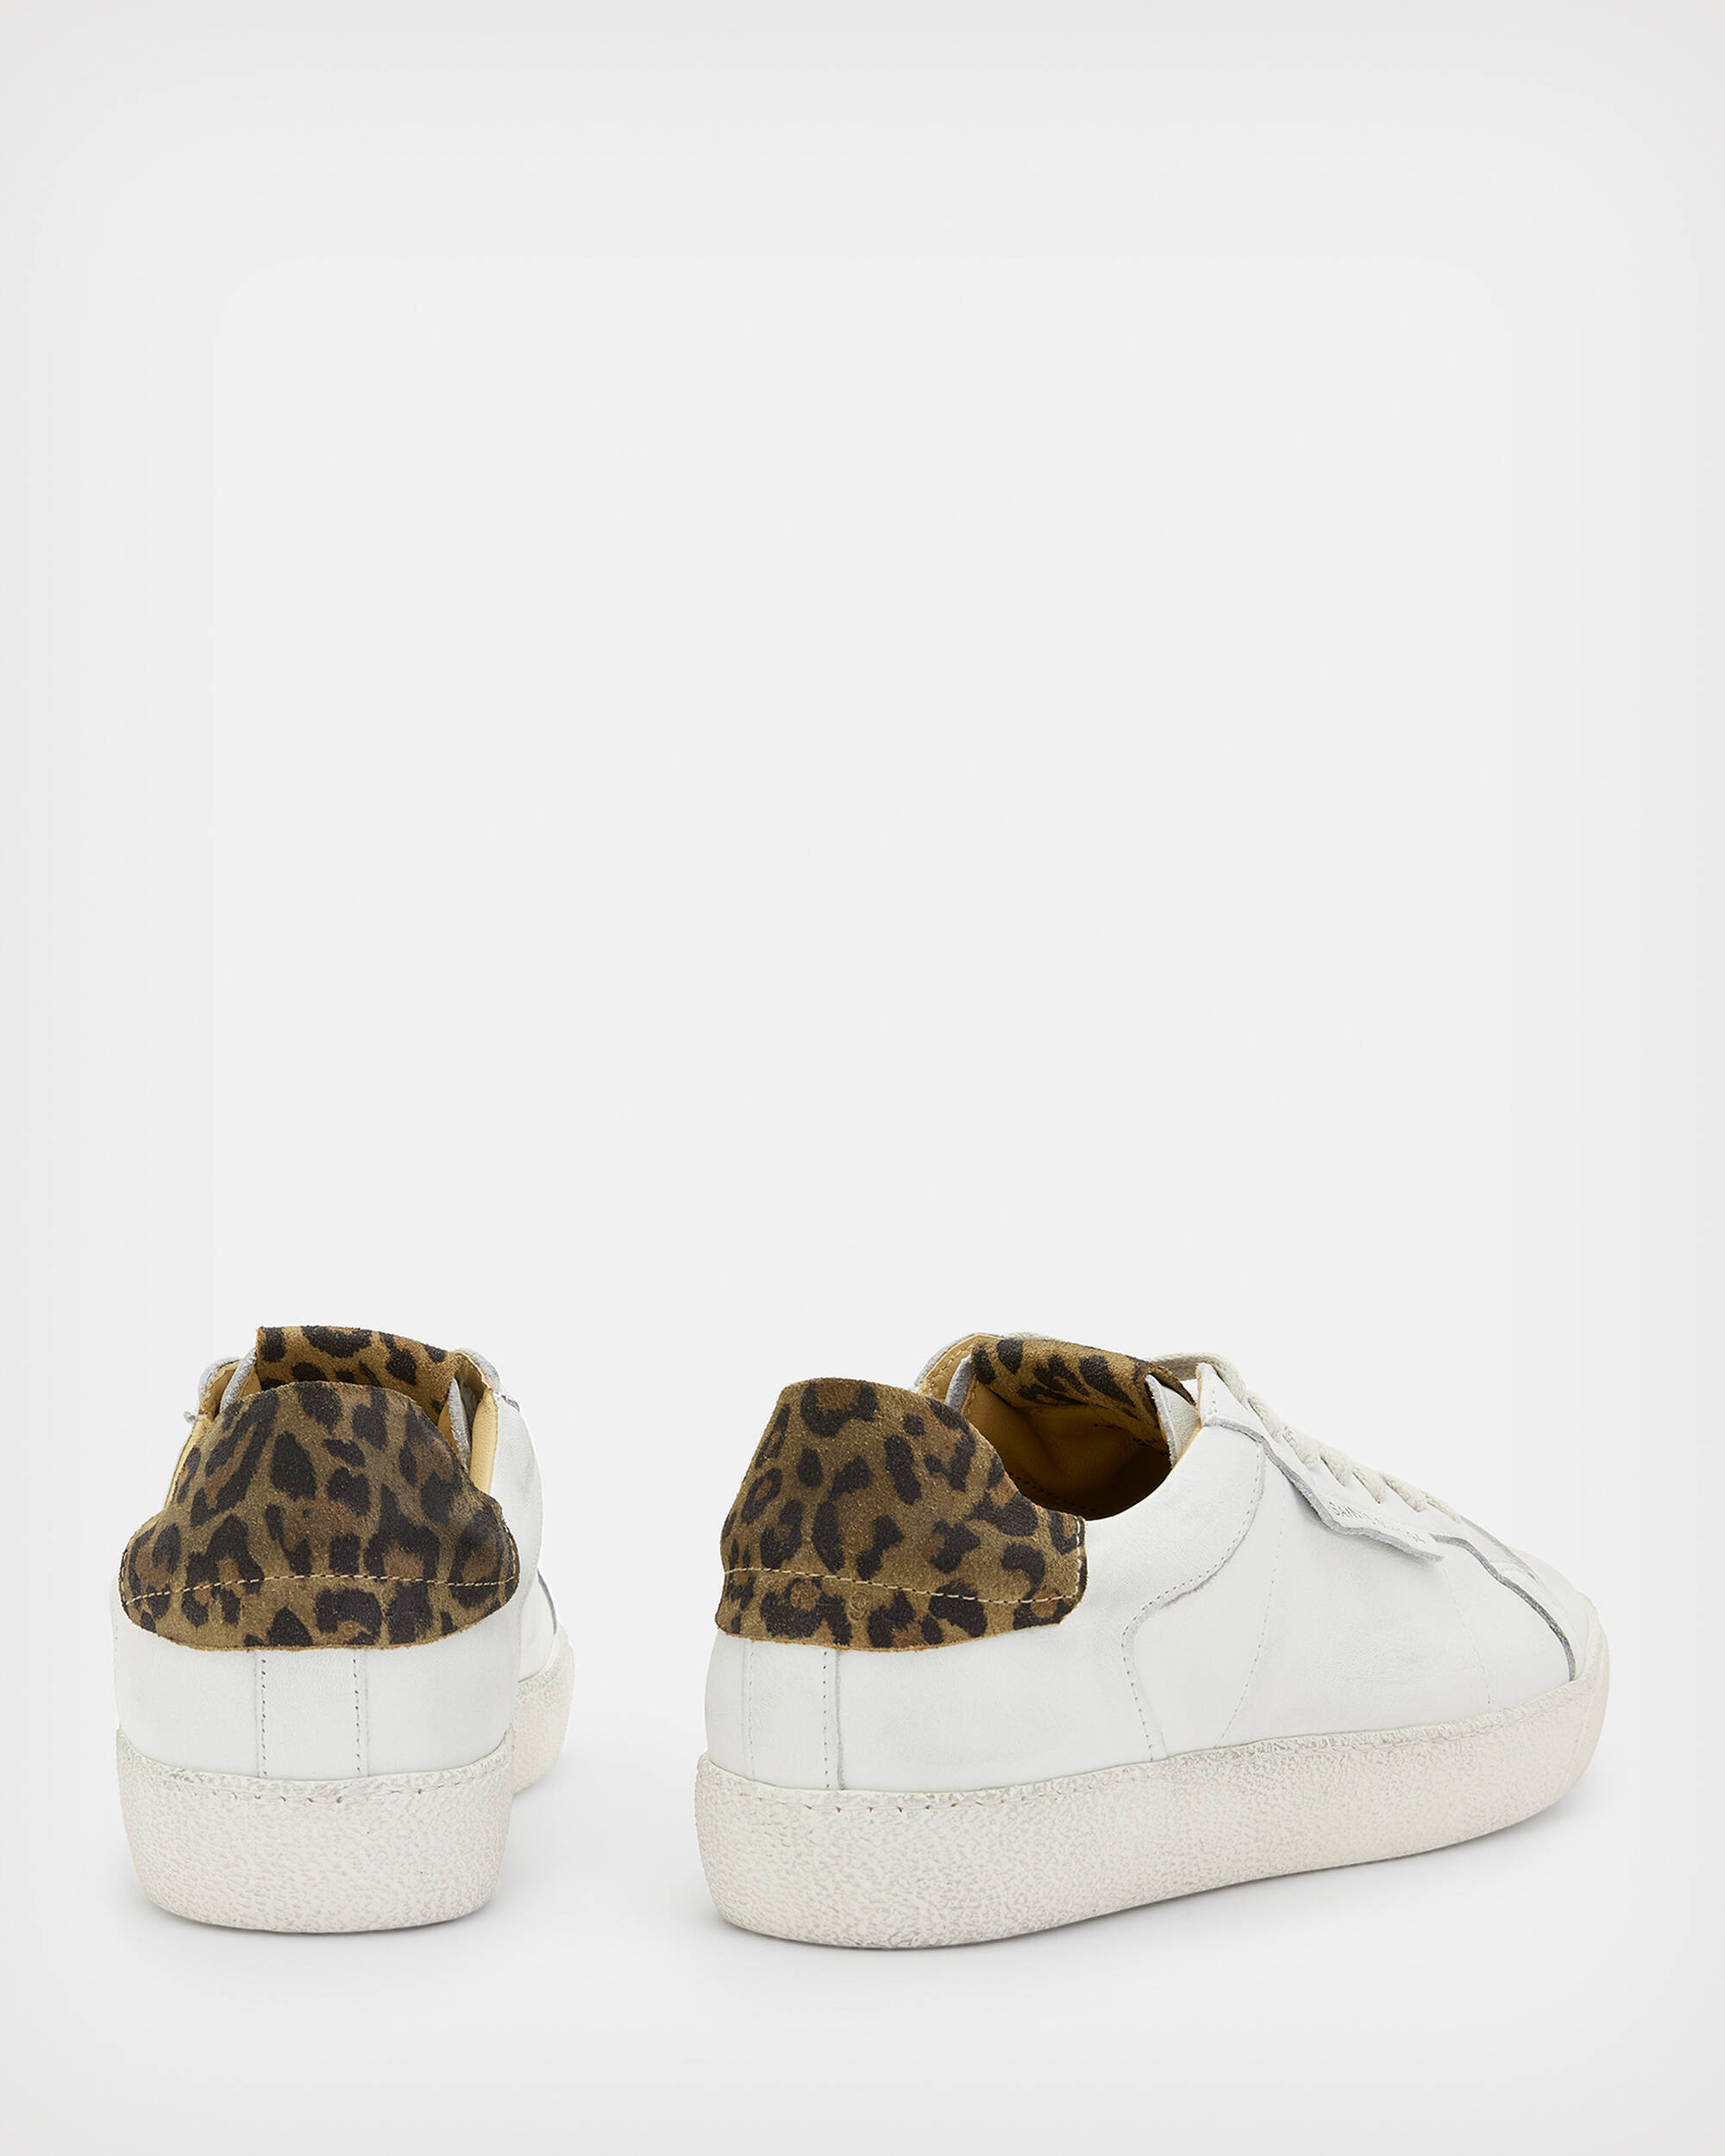 Sheer Leather Leopard Print Trainers  large image number 5